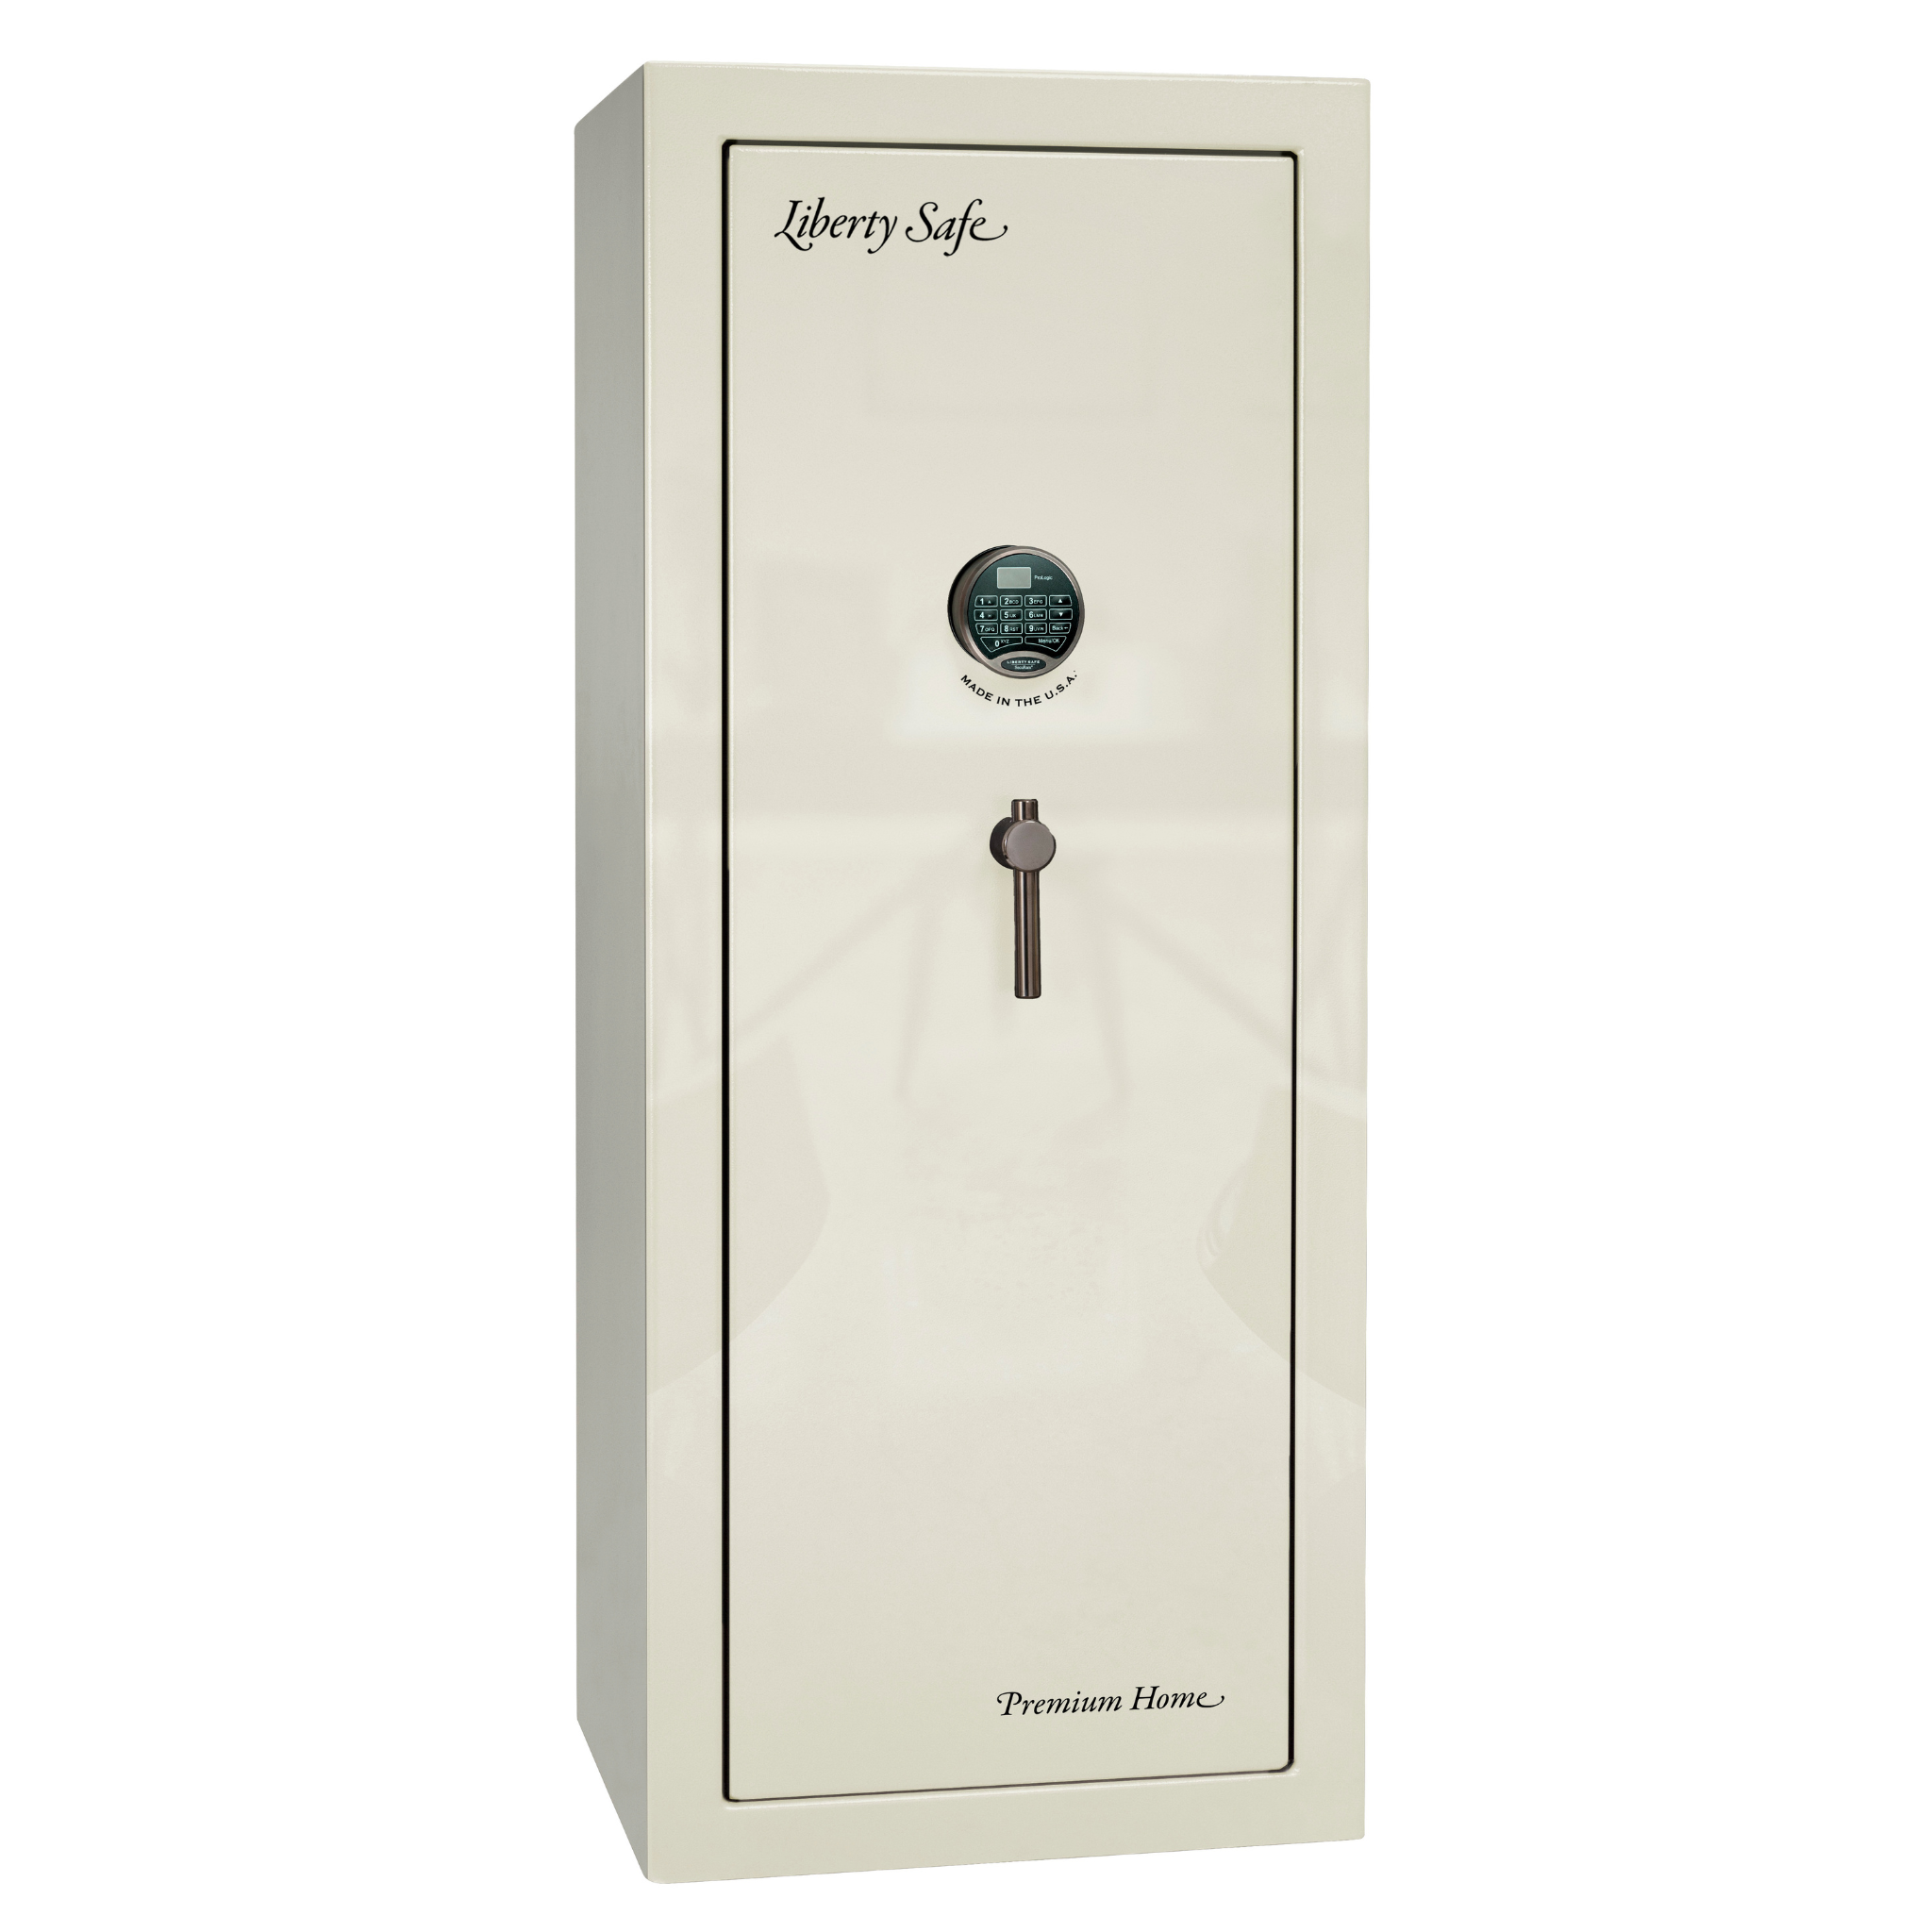 Premium Home Series | Level 7 Security | 2 Hour Fire Protection | 17 | Dimensions: 60.25"(H) x 24.5"(W) x 19"(D) | White Gloss - Closed Door